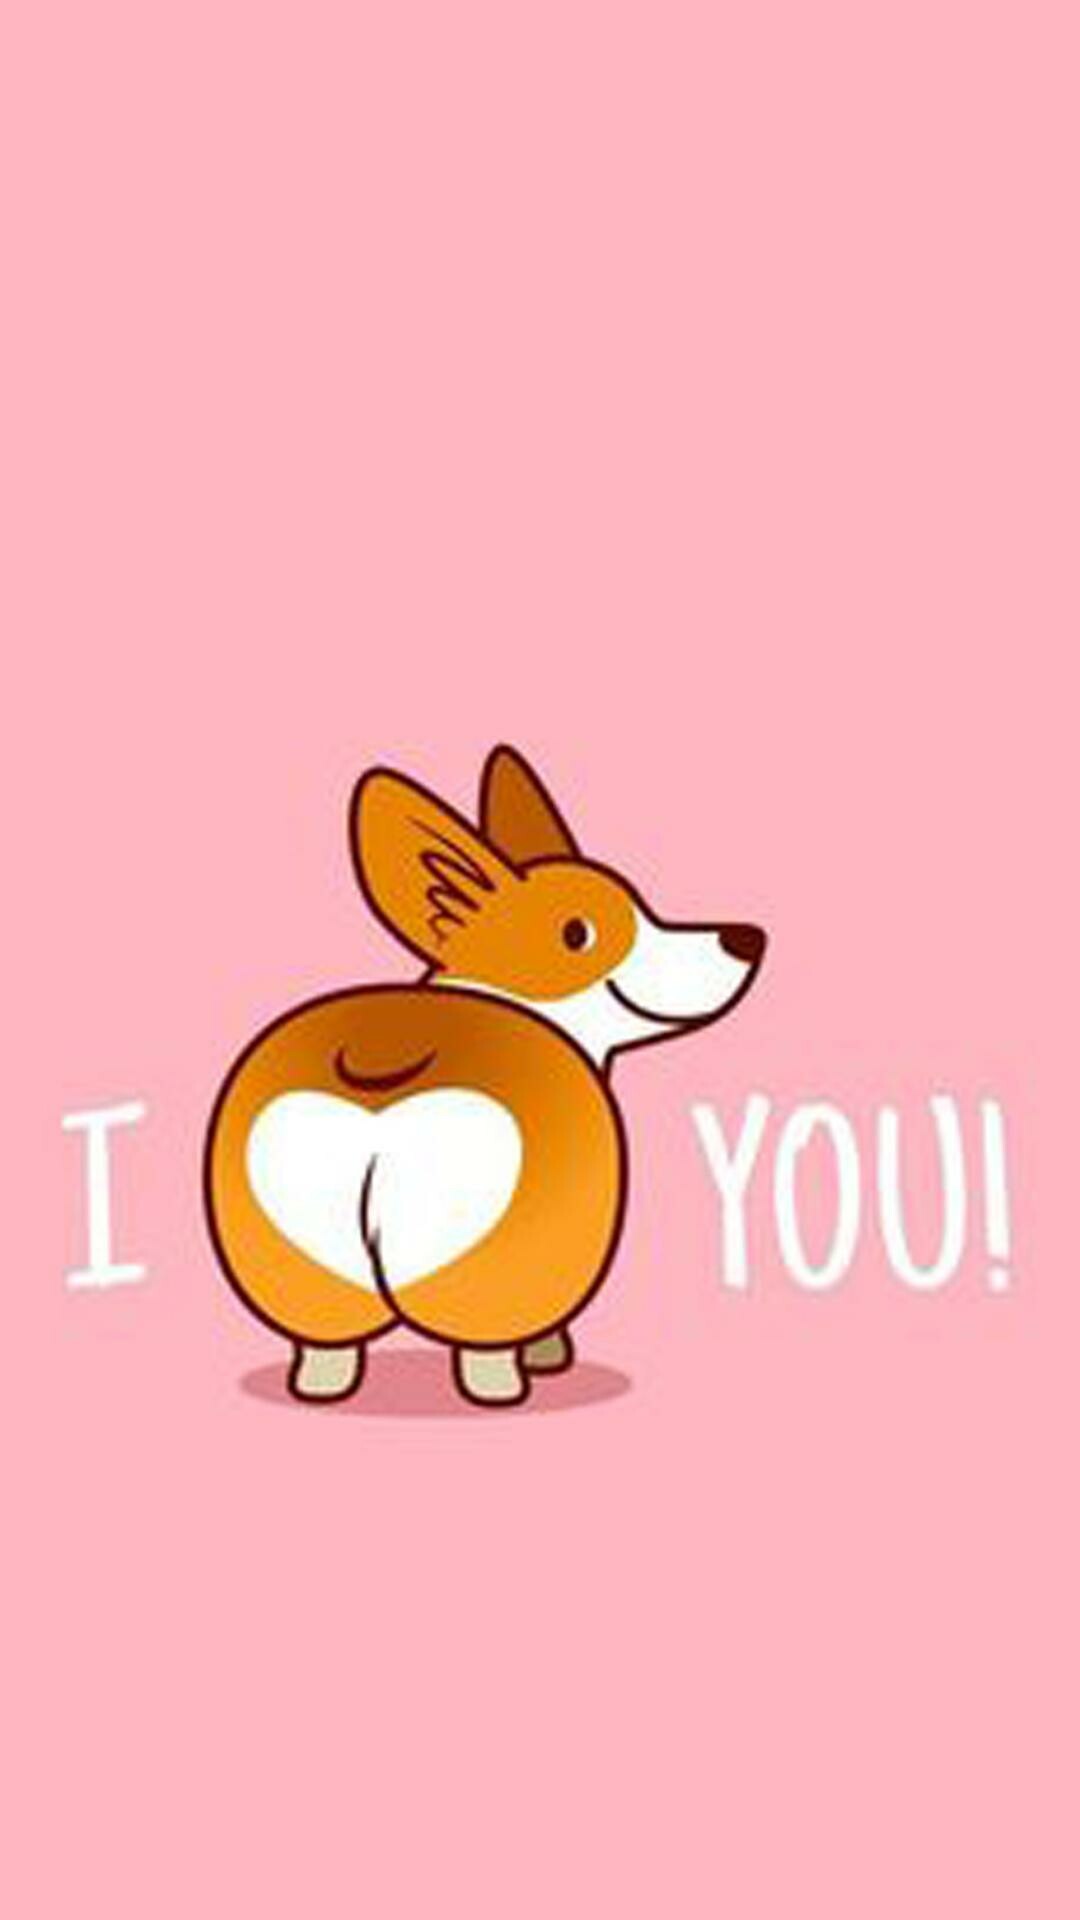 Corgi: The name of the breed is derived from the Welsh words cor and ci. 1080x1920 Full HD Wallpaper.